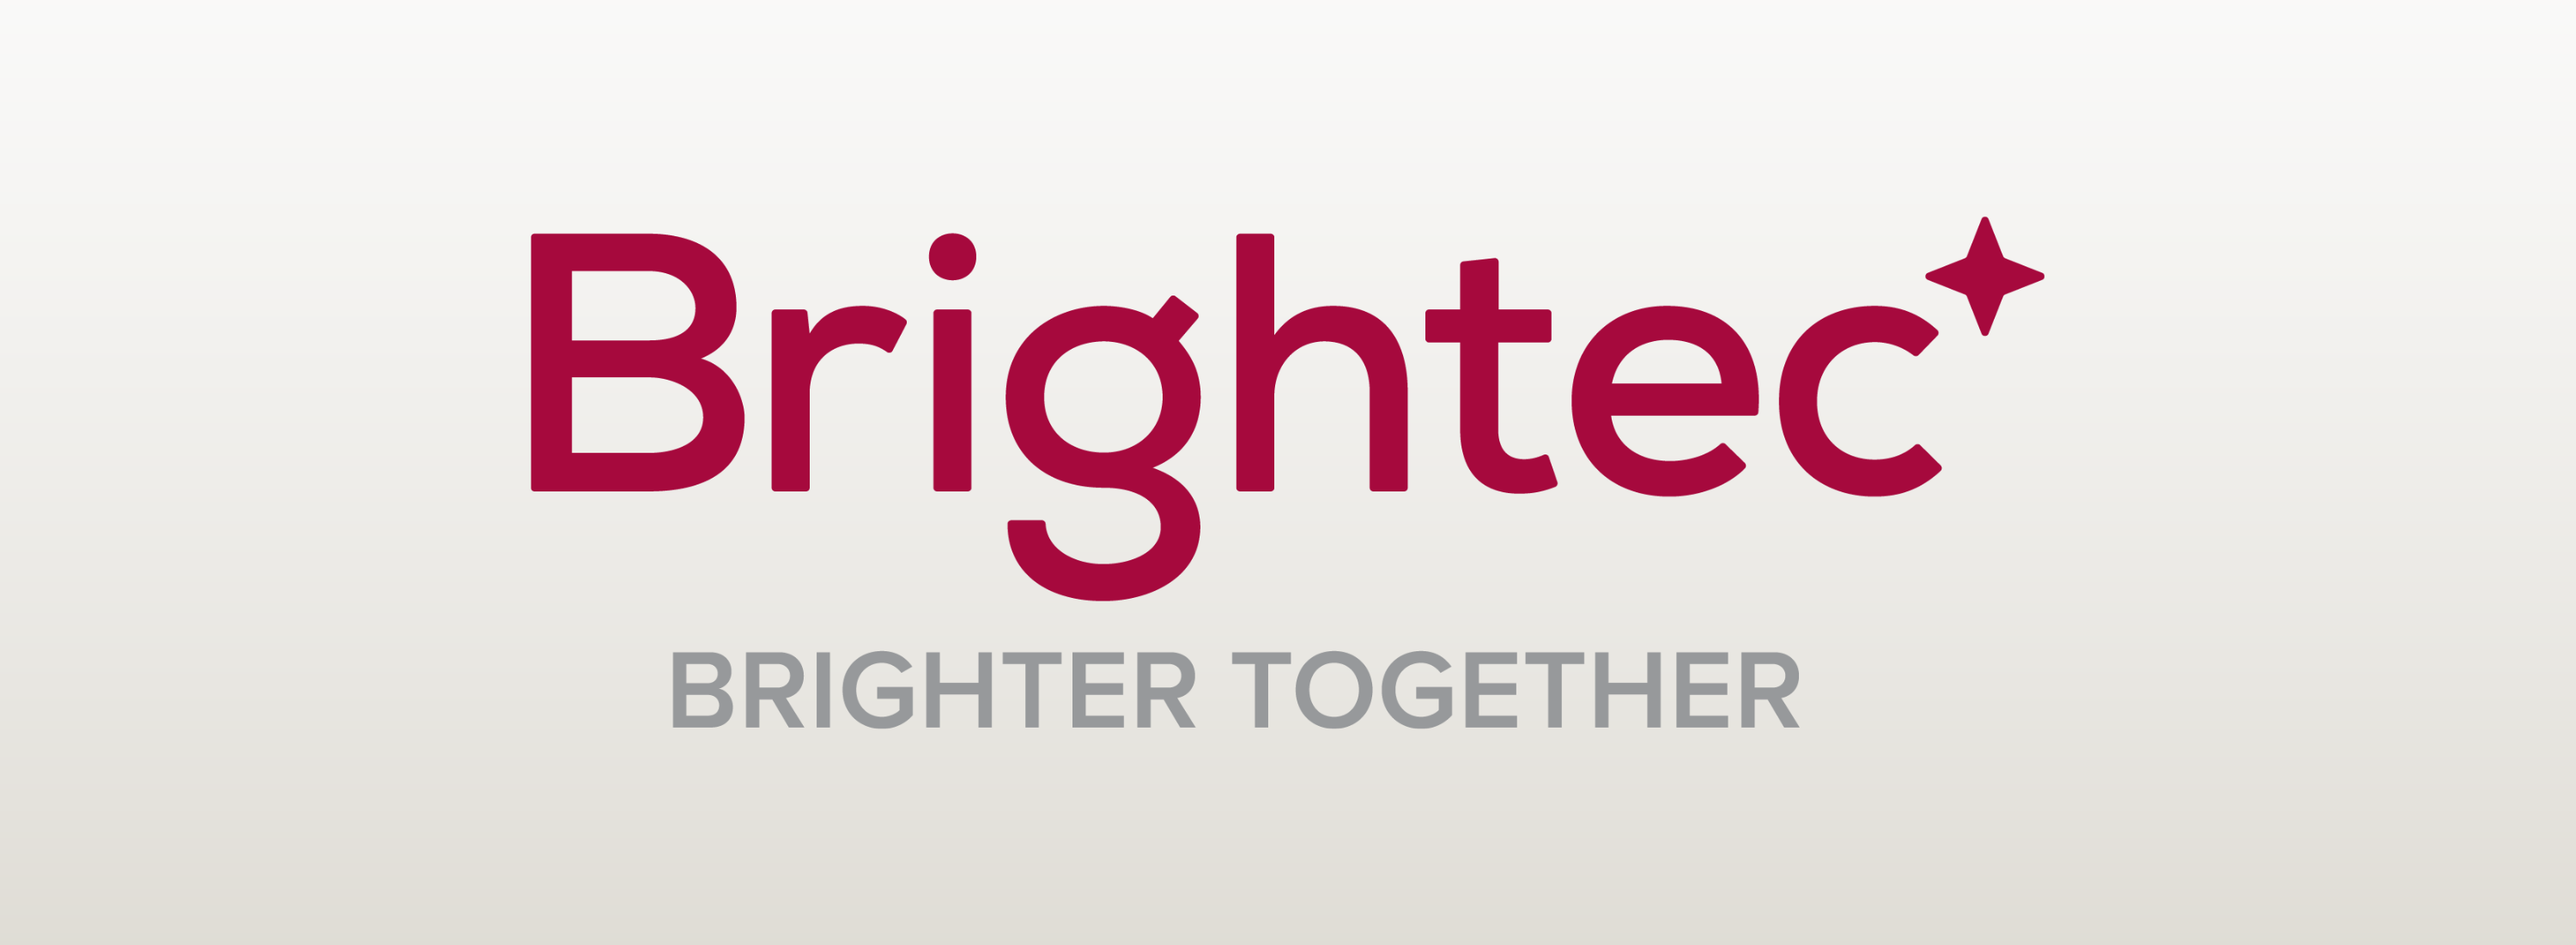 Brightech - brighter together